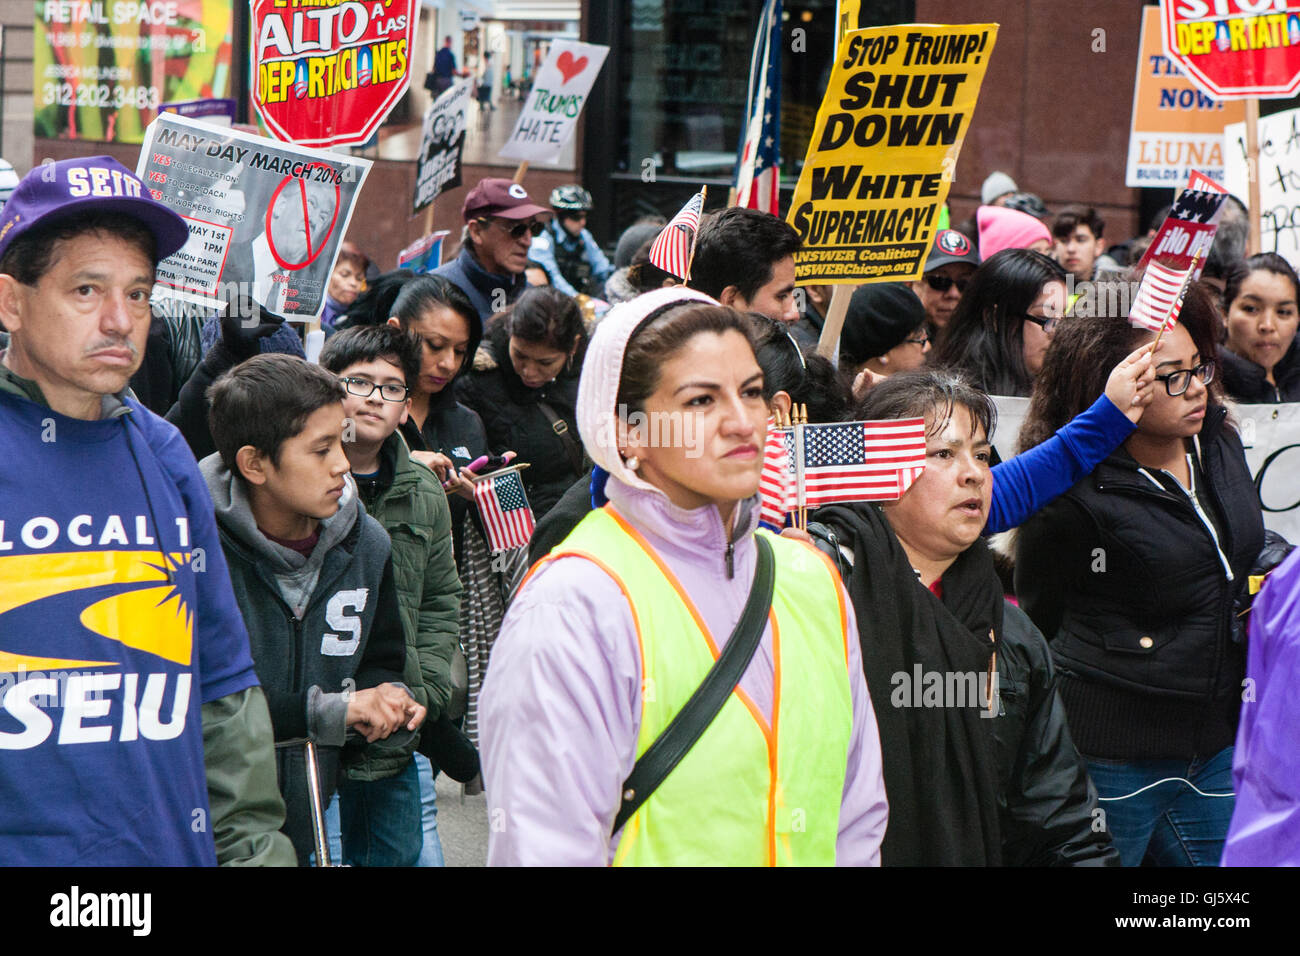 Hundreds of marchers unite on May Day in Chicago to protest Donald Trump's anti immigrant rhetoric. Stock Photo